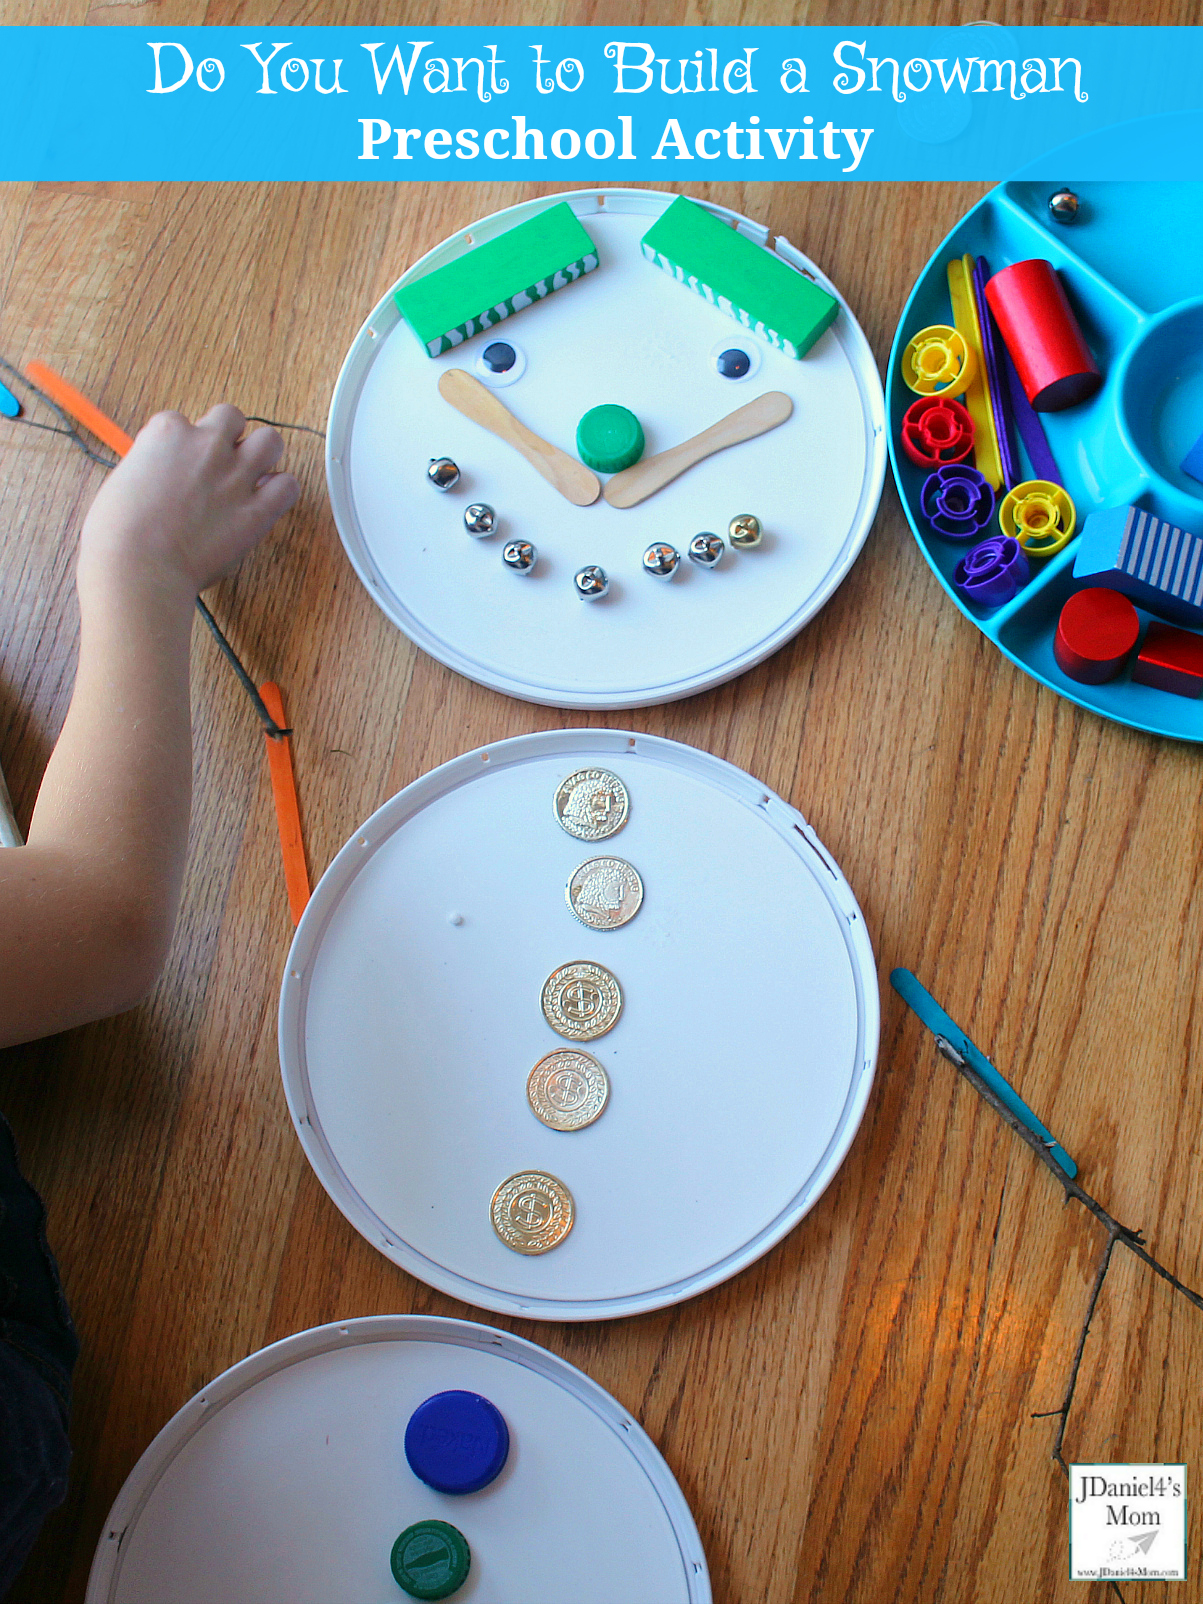 Do You Want to Build a Snowman Preschool Activity- Three paint buckets lids and a bunch of household treasures and craft supplies are all you need for this creative play activity. It does't just have to been for preschoolers. Big kids will have fun building a snowman too.